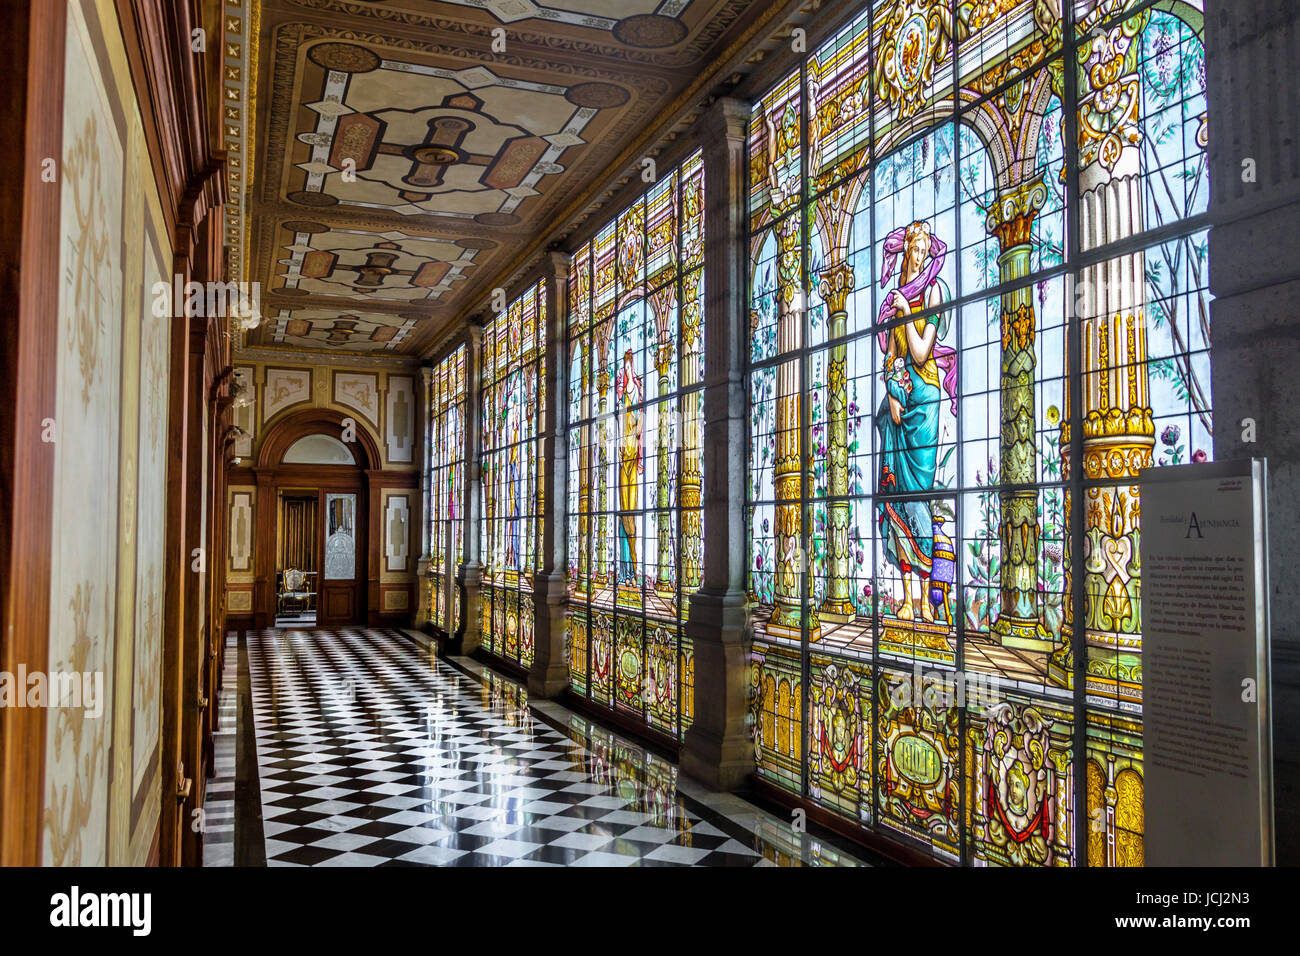 Chapultepec Castle hallway corridor with Stained glass windows - Mexico City, Mexico Stock Photo